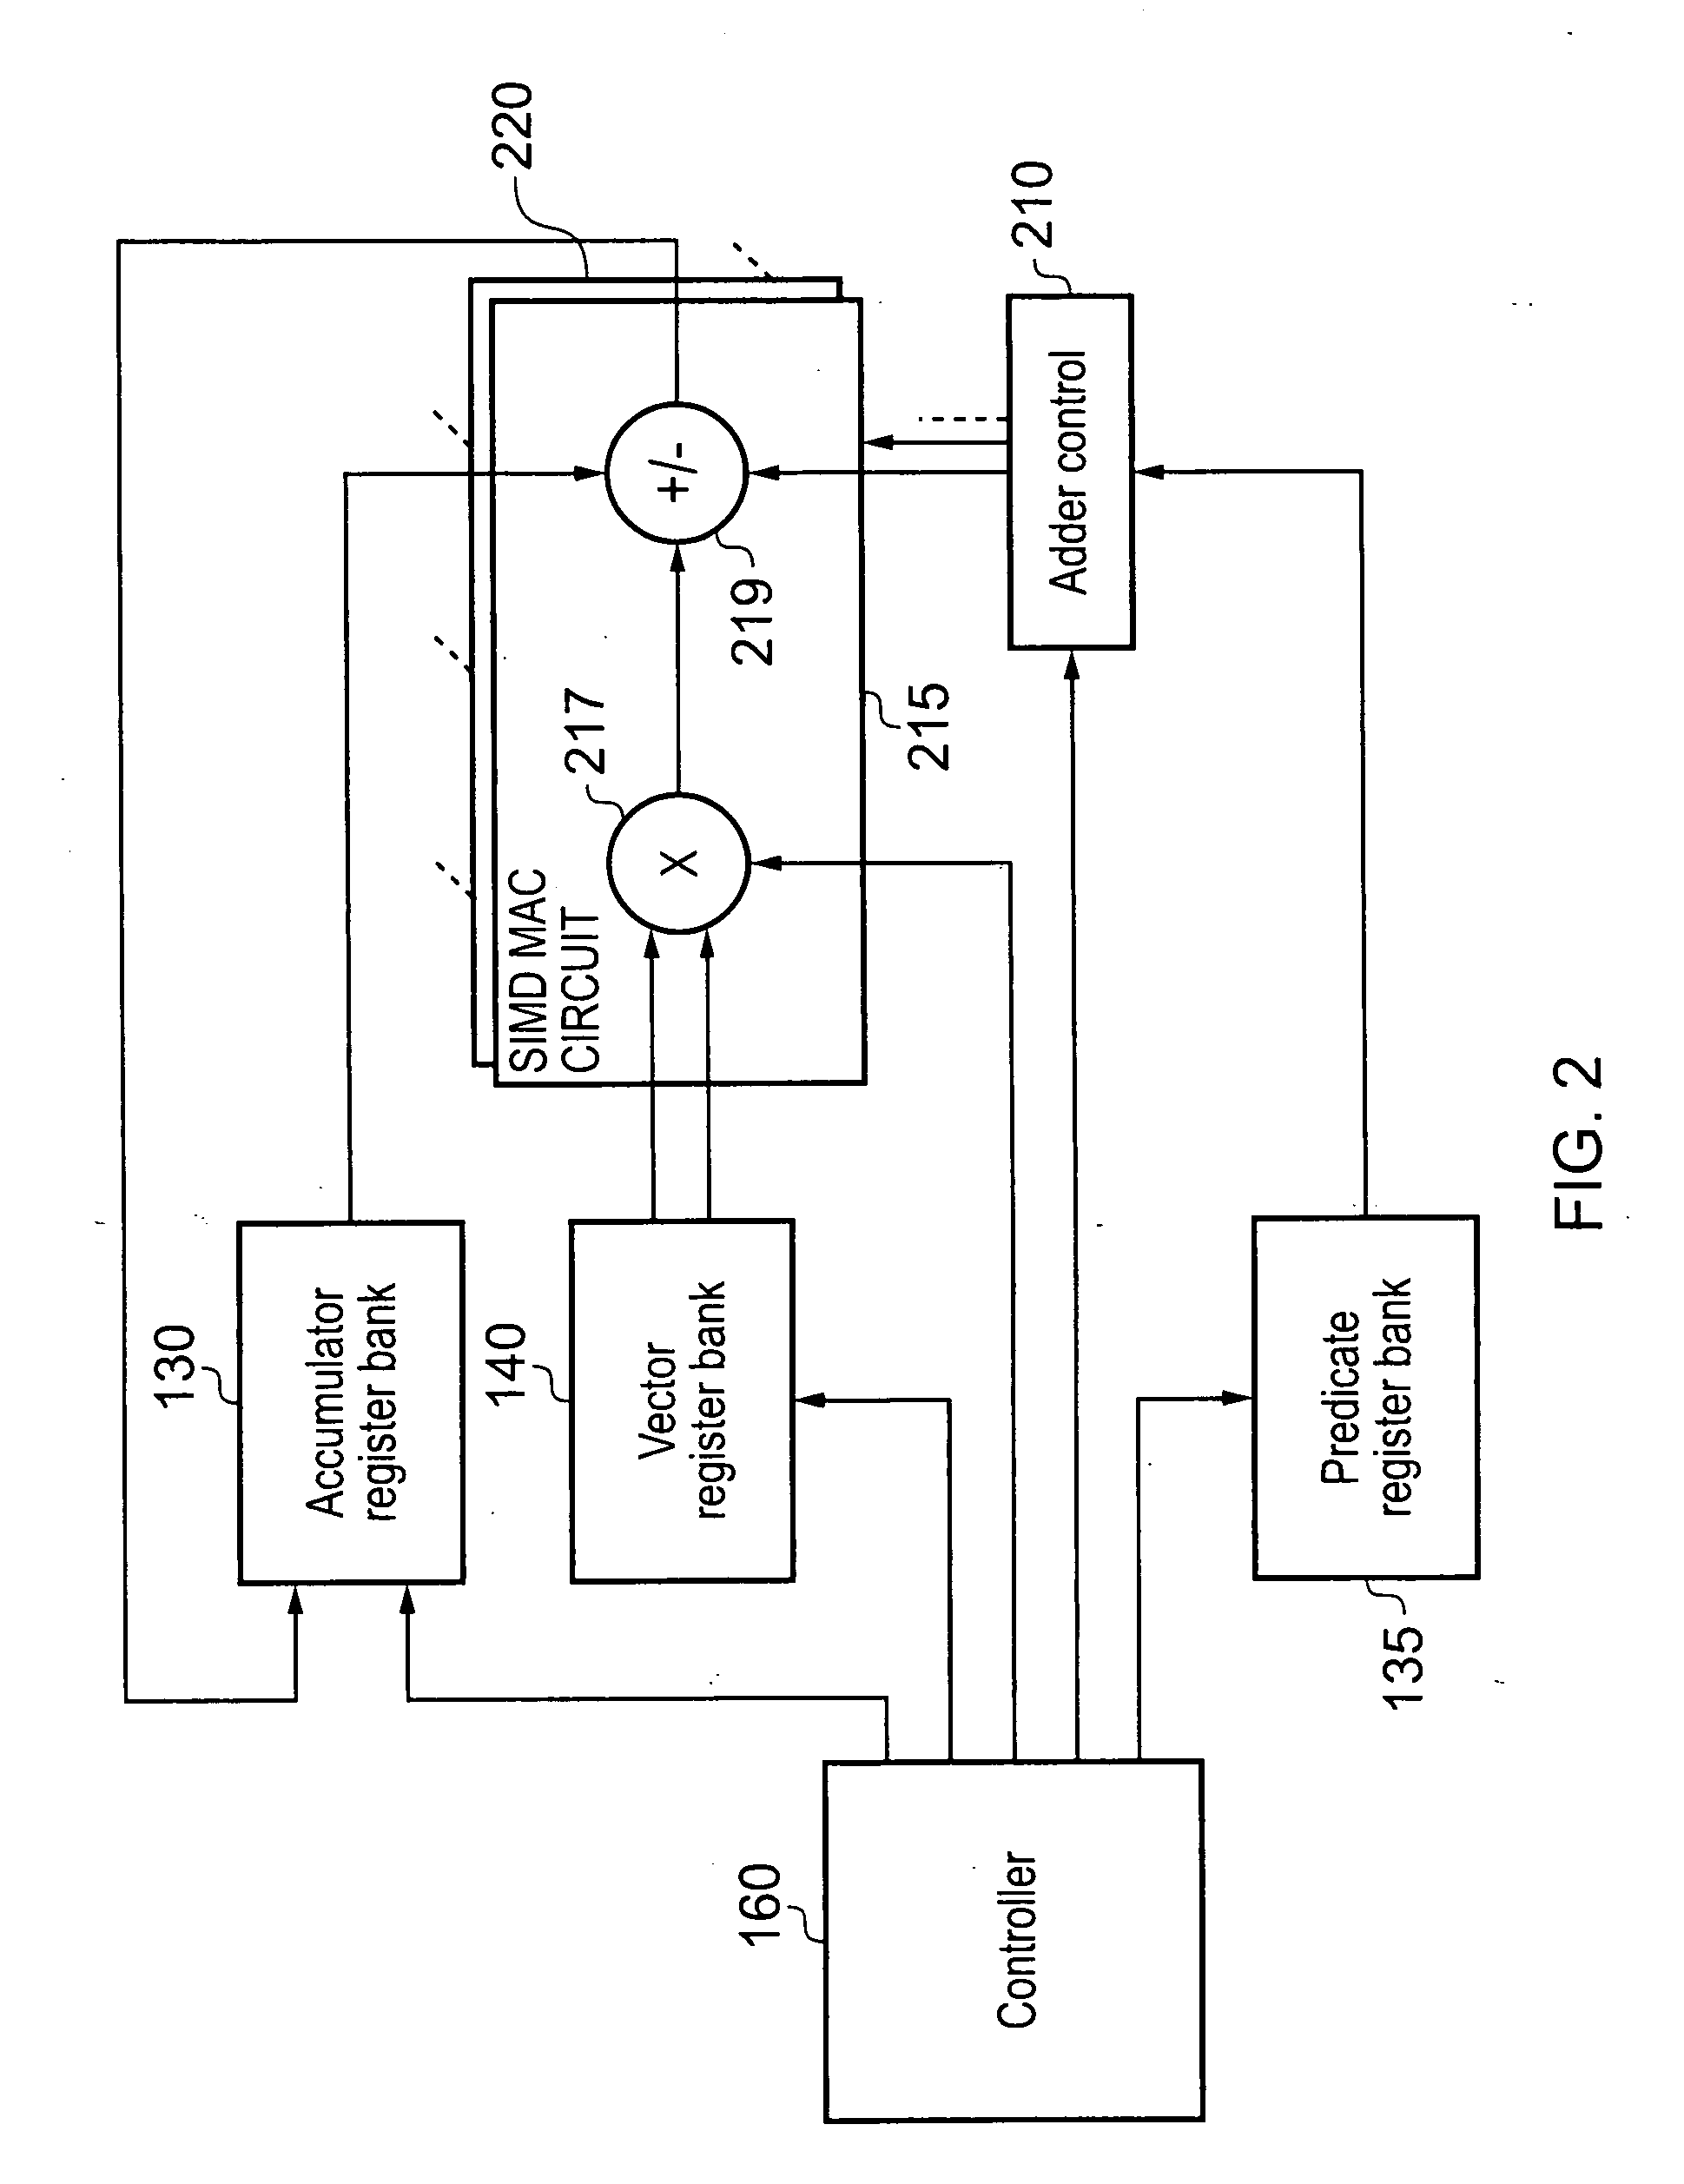 Apparatus and method for performing multiply-accumulate operations